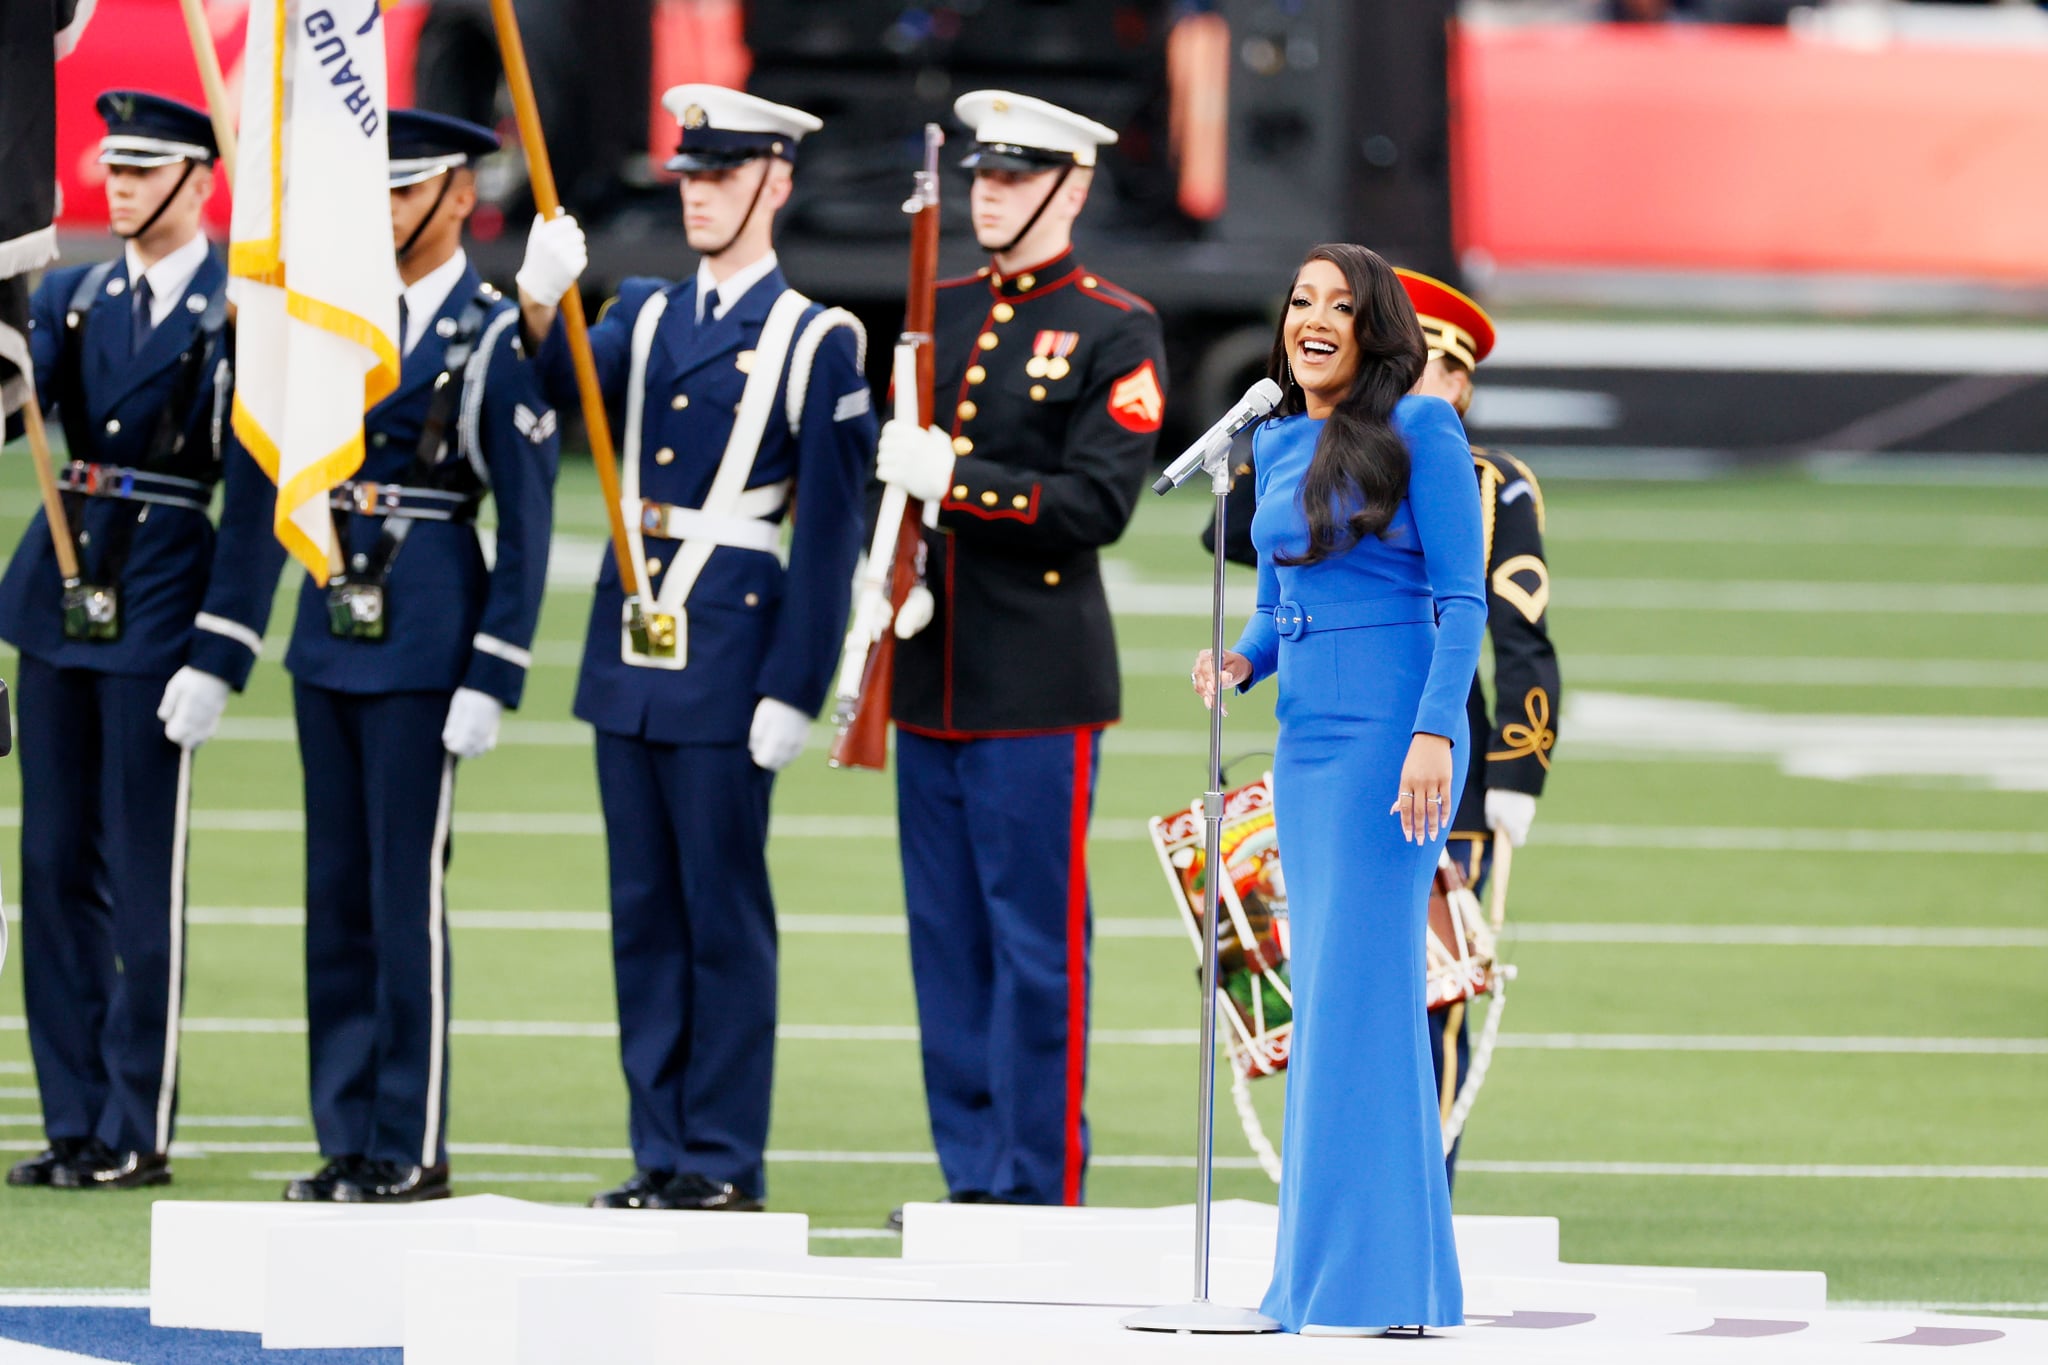 INGLEWOOD, CALIFORNIA - FEBRUARY 13: Singer Mickey Guyton performs the national anthem before Super Bowl LVI between the Cincinnati Bengals and the Los Angeles Rams at SoFi Stadium on February 13, 2022 in Inglewood, California. (Photo by Steph Chambers/Getty Images)